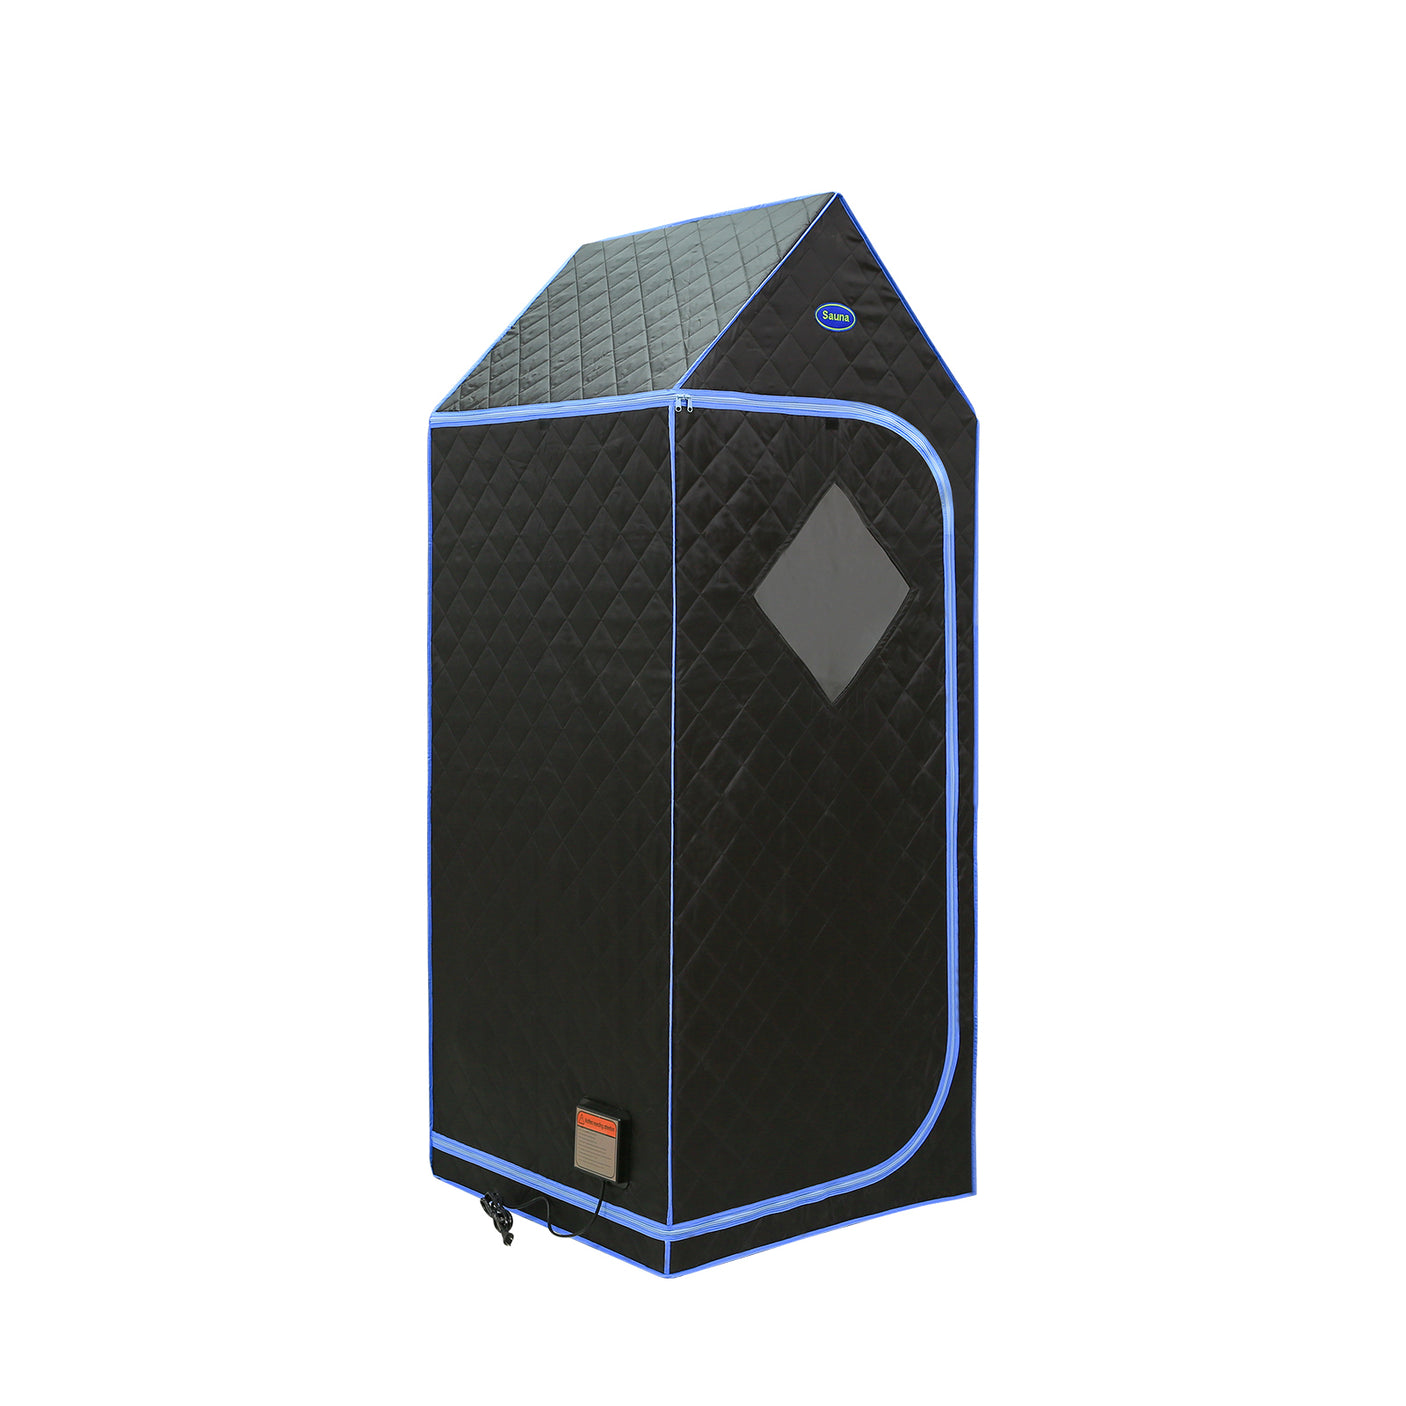 Portable Gothic Roof Plus Type Full Size Far Infrared Sauna tent. Spa, Detox ,Therapy and Relaxation at home.Larger Space,Stainless Steel Pipes Connector Easy to Install. FCC Certification--Black